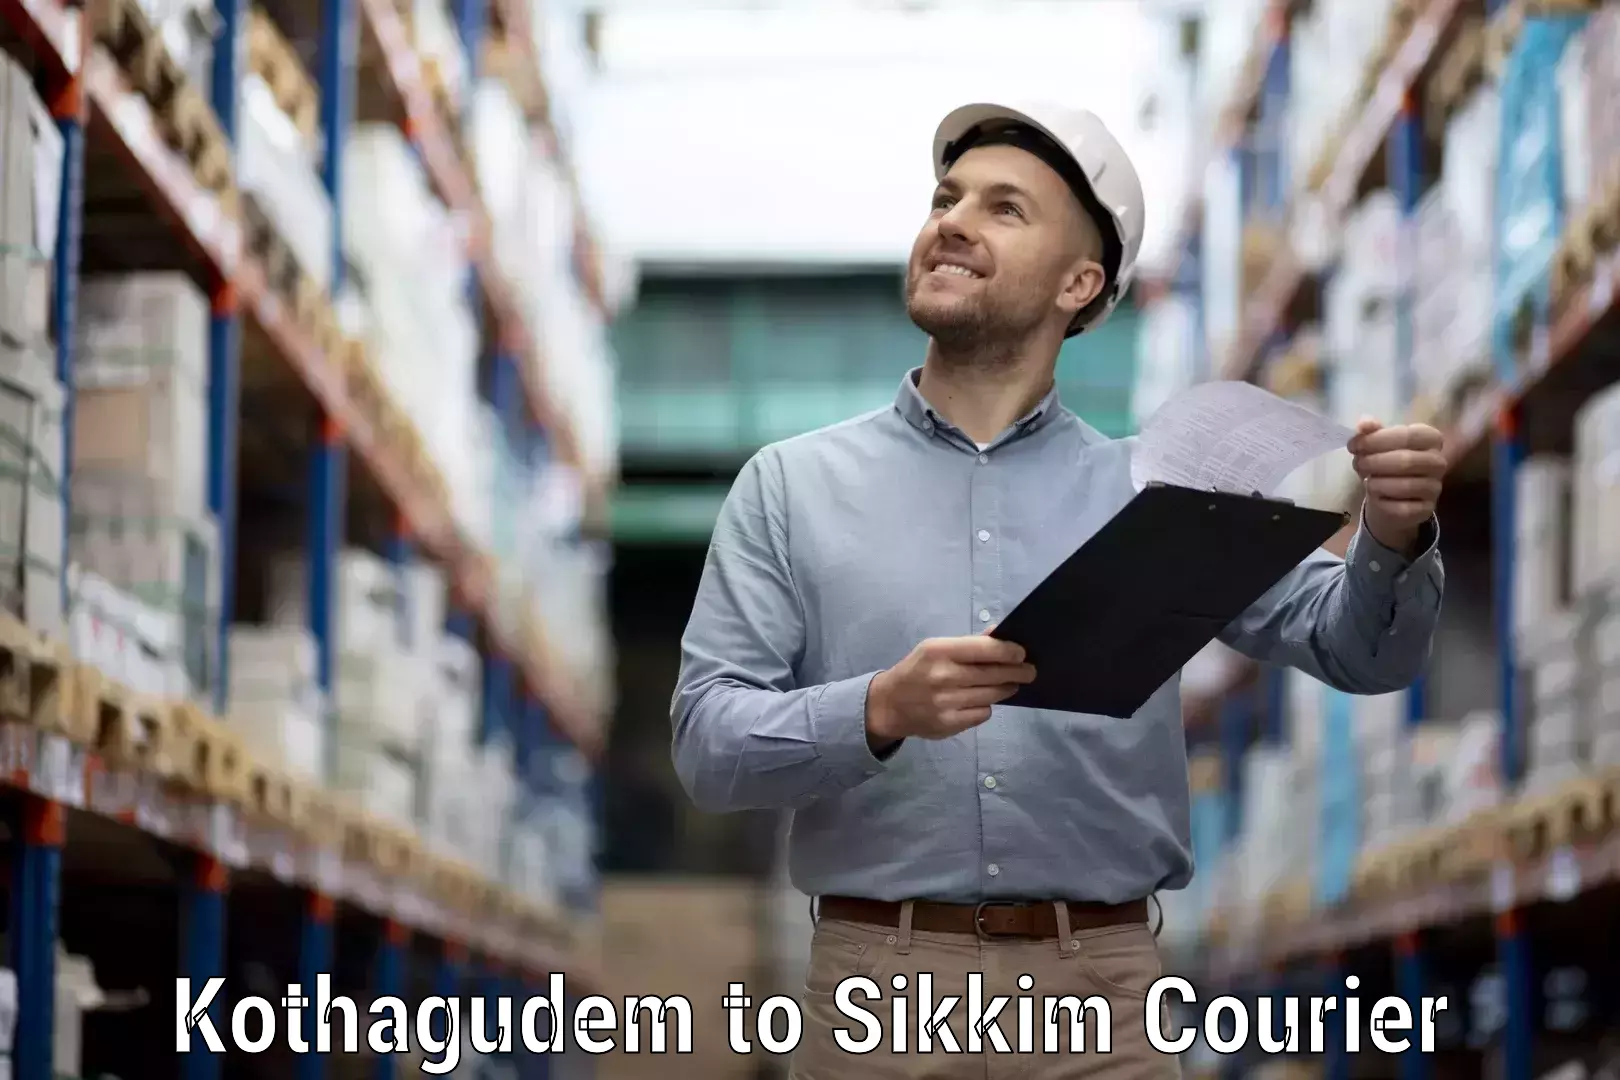 Next-day delivery options in Kothagudem to Sikkim